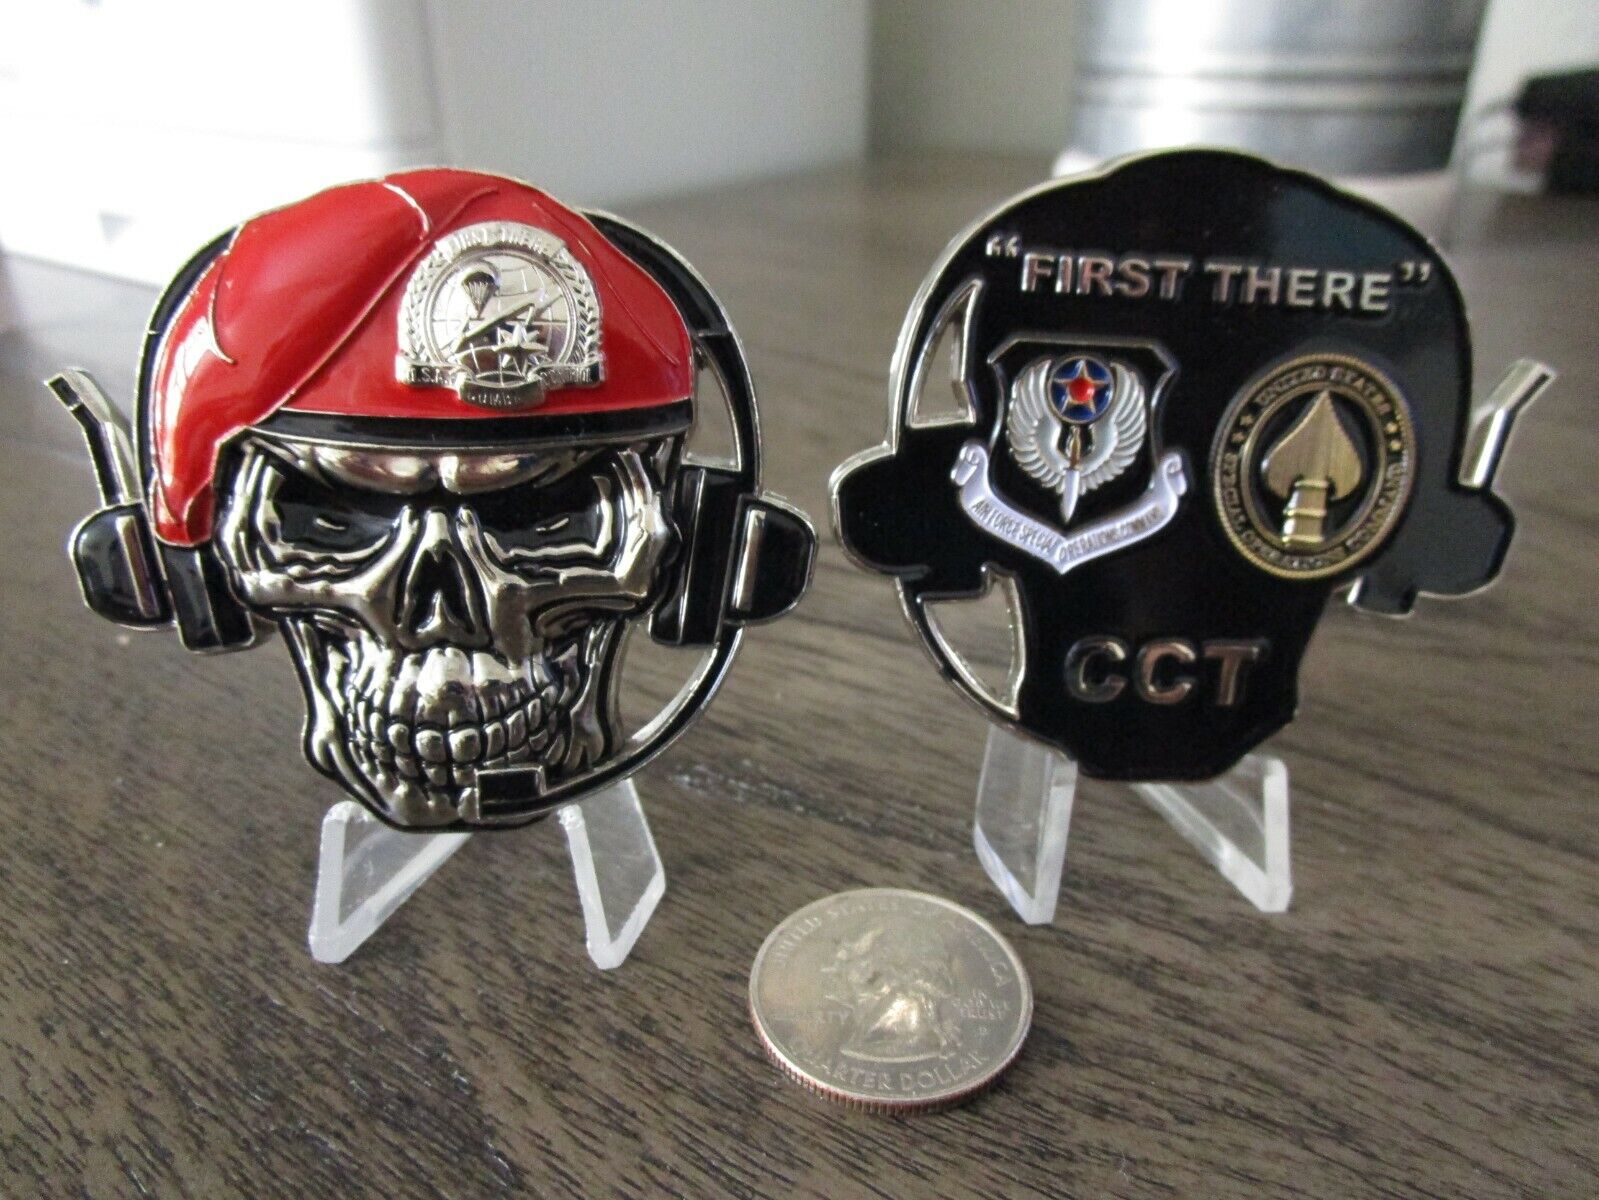 USAF AFSOC CCT Special Forces Combat Control Team Beret Skull Challenge Coin